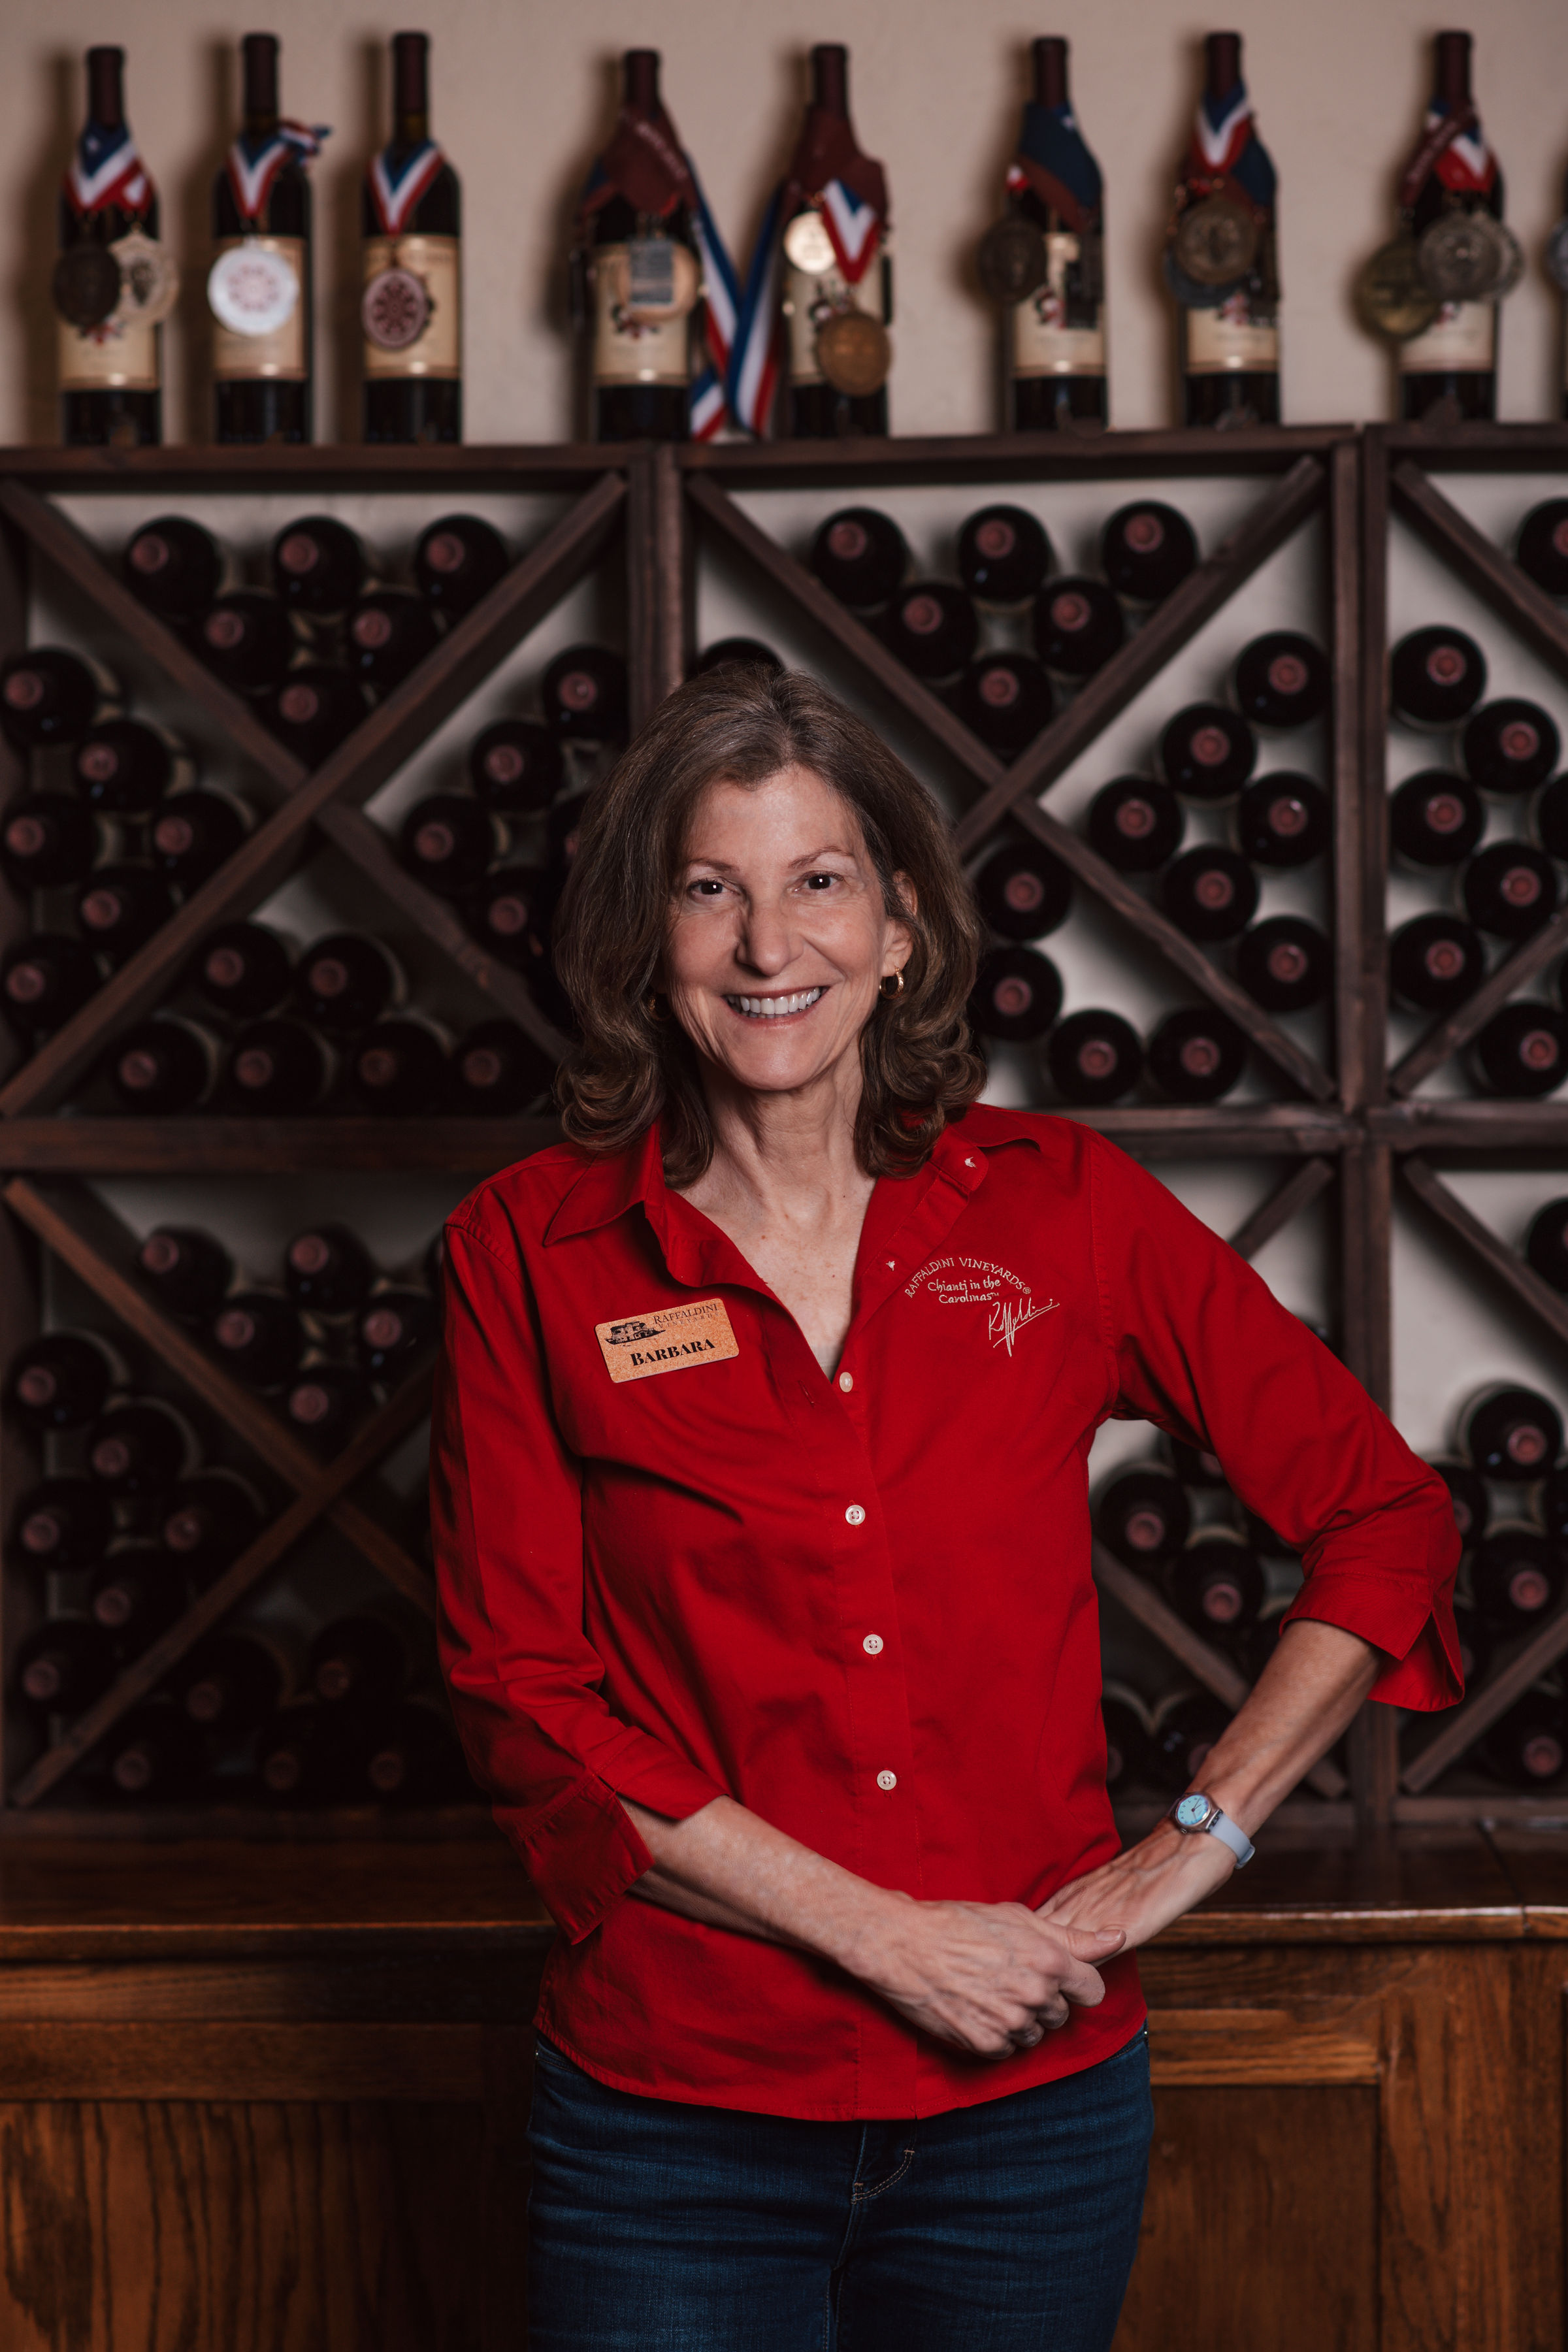 Barbara C. Raffaldini is general counsel and a co-owner of Raffaldini Vineyards & Winery, LLC. She graduated cum laude with a B.S. from the Georgetown University, School of Foreign Service and received her J.D. from the Georgetown University Law Center in 1987. She has practiced commercial real estate law and corporate law since her law school graduation.  Barbara has been a partner in the Illinois law firm of Pachter, Gregory & Raffaldini, PC since 1997 and she is a member of the State Bars of Maryland, Washington, D.C., Illinois and North Carolina.  The family business brought Barbara to North Carolina and she now resides full time in Winston-Salem and her firm now has a North Carolina office.  Barbara is also the co-founder of Beyond the Vines Travel, LLC, a company that creates and leads custom crafted wine tours.Barbara has long been involved in community activities and upon her arrival in Winston Salem in 2015, she began volunteering at Bookmarks and is now the President of its Board of Directors.  Raffaldini Vineyards is the official wine provider for events hosted by Bookmarks and in 2015 Raffaldini Vineyards became a proud sponsor and the official winery of The Piedmont Opera, and Barbara serves on its Board of Directors.  She is also one of the founding Board of Directors of the North Carolina Fine Wine Society, which funds a scholarship for local students attending North Carolina colleges, who are pursuing careers in enology, viticulture, hospitality or agritourism.